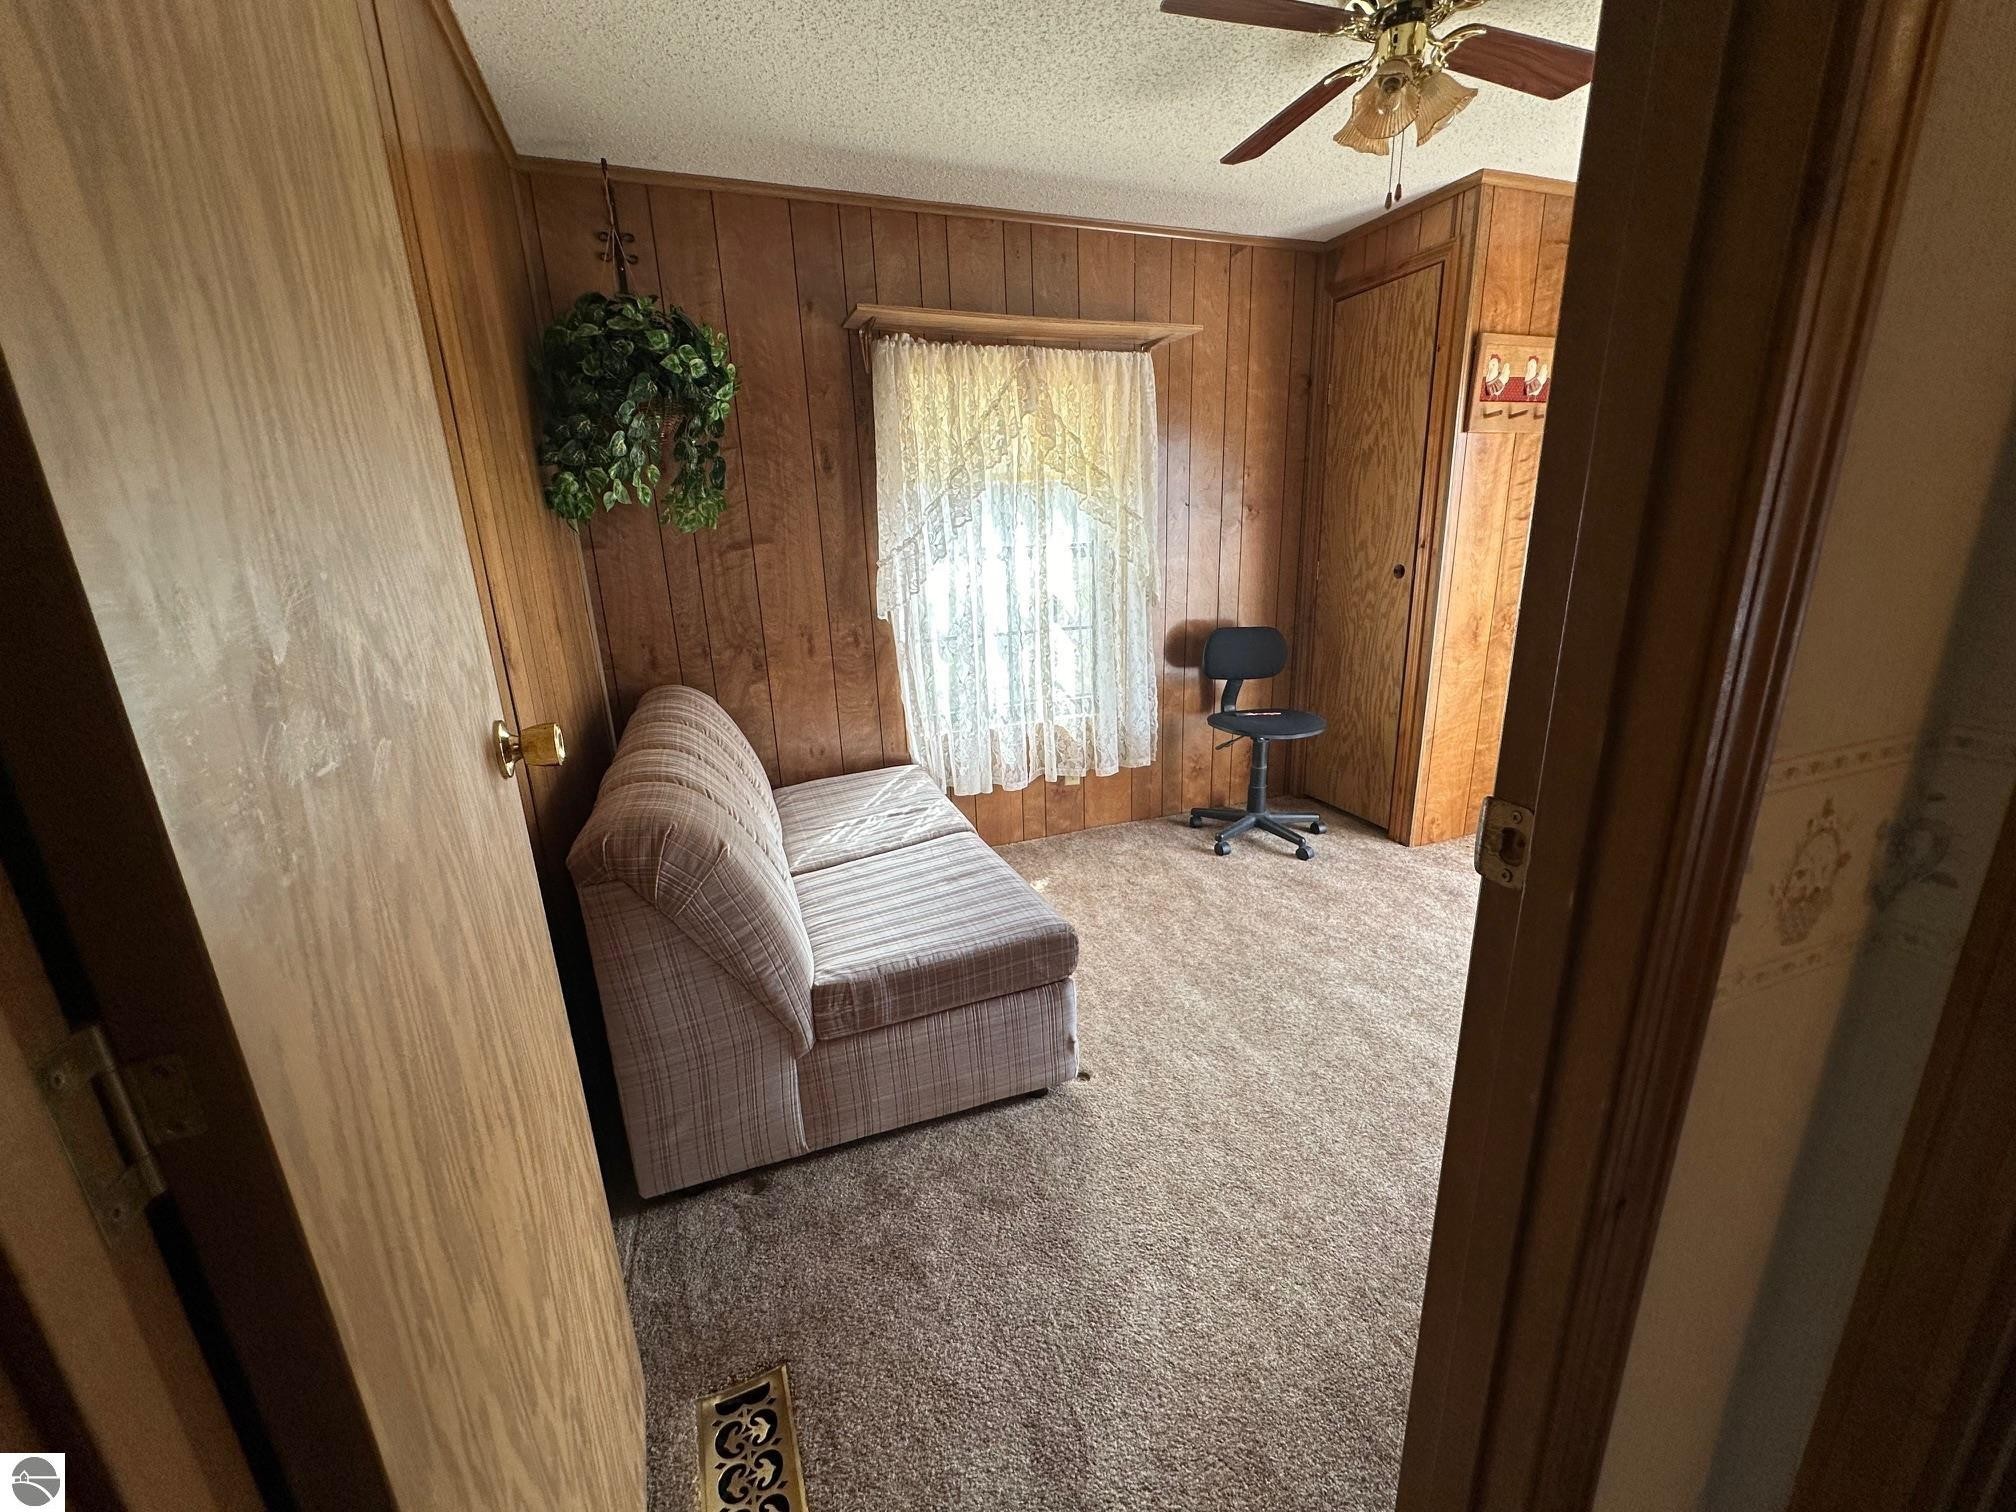 Kewadin, Michigan, 49648, United States, 3 Bedrooms Bedrooms, ,2 BathroomsBathrooms,Residential,For Sale,1506967